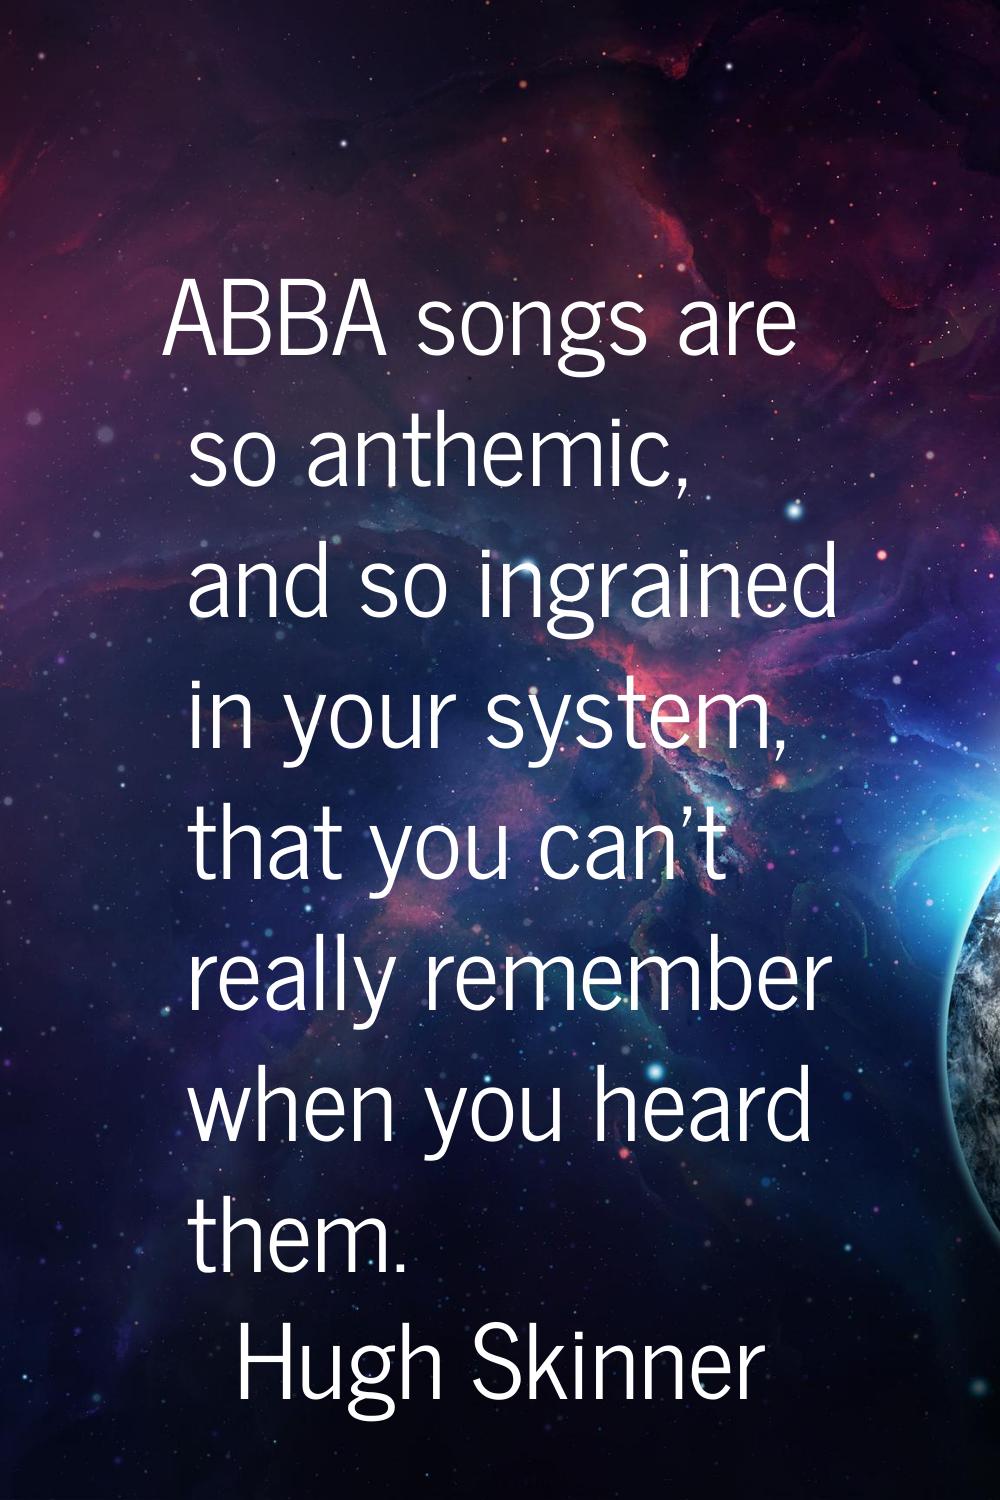 ABBA songs are so anthemic, and so ingrained in your system, that you can't really remember when yo